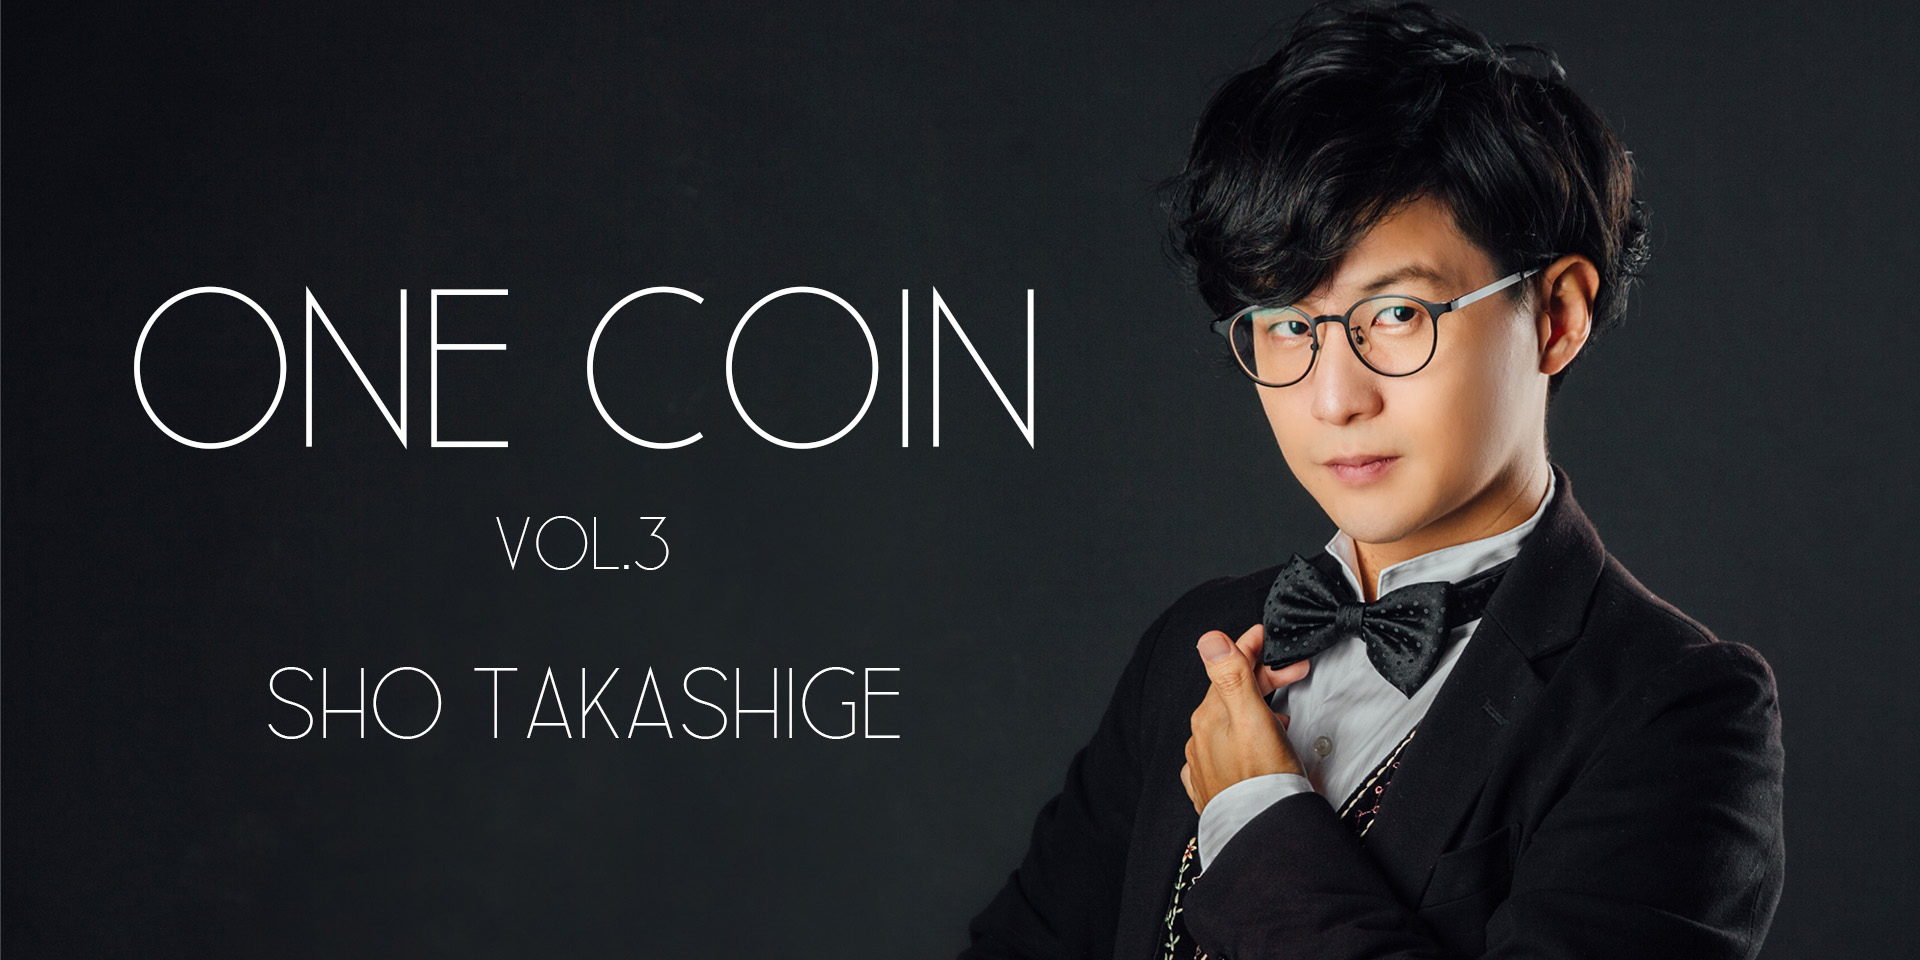 One Coin Vol 3 by Sho Takashige (MP4 Video Download)